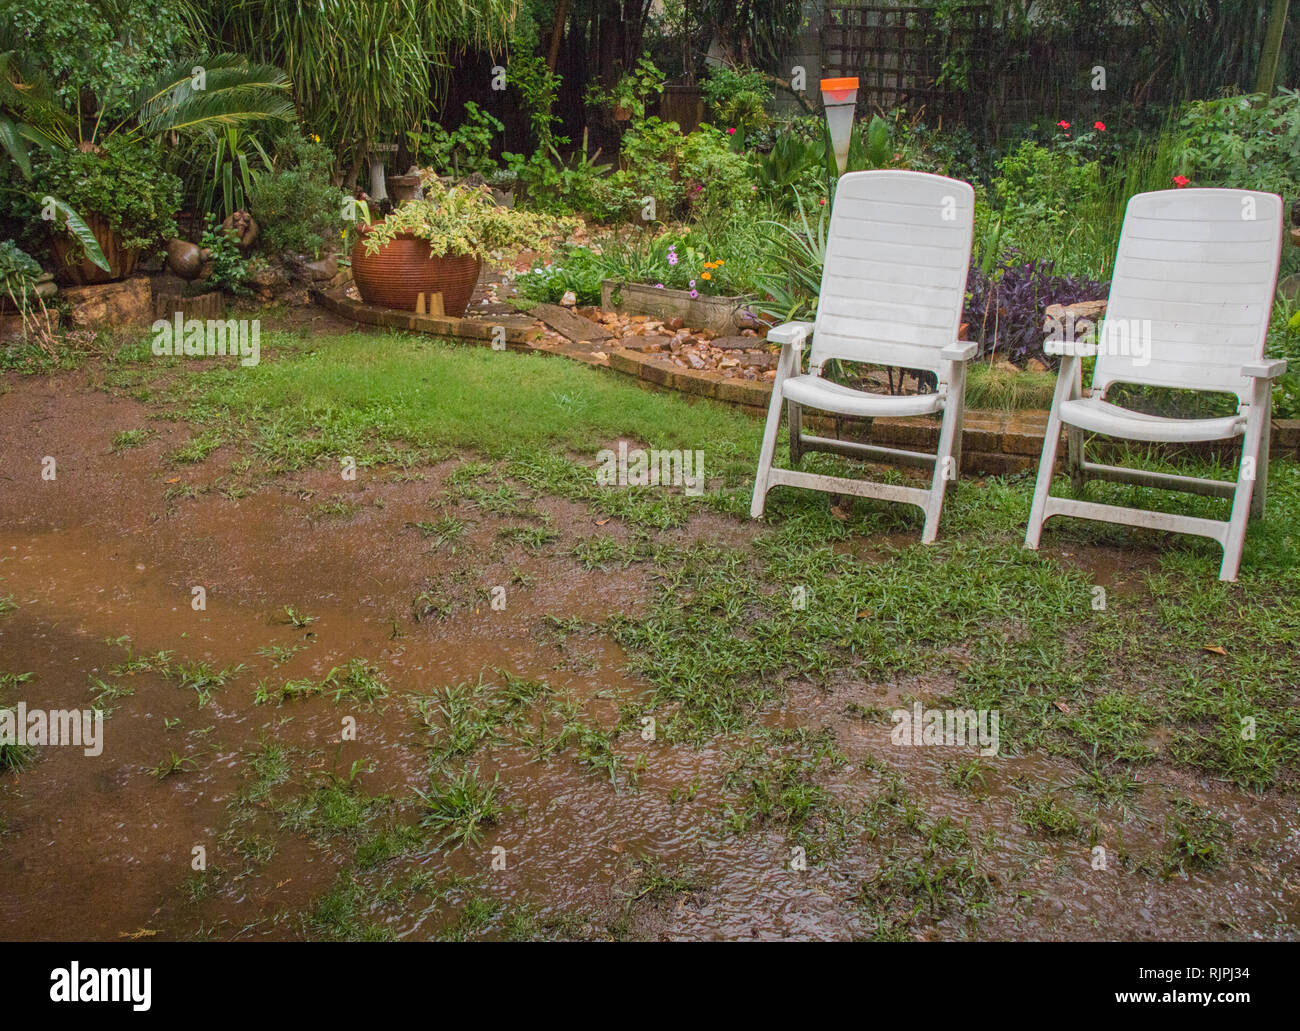 A Garden Wet From A Summer Rain Storm Image With Copy Space In